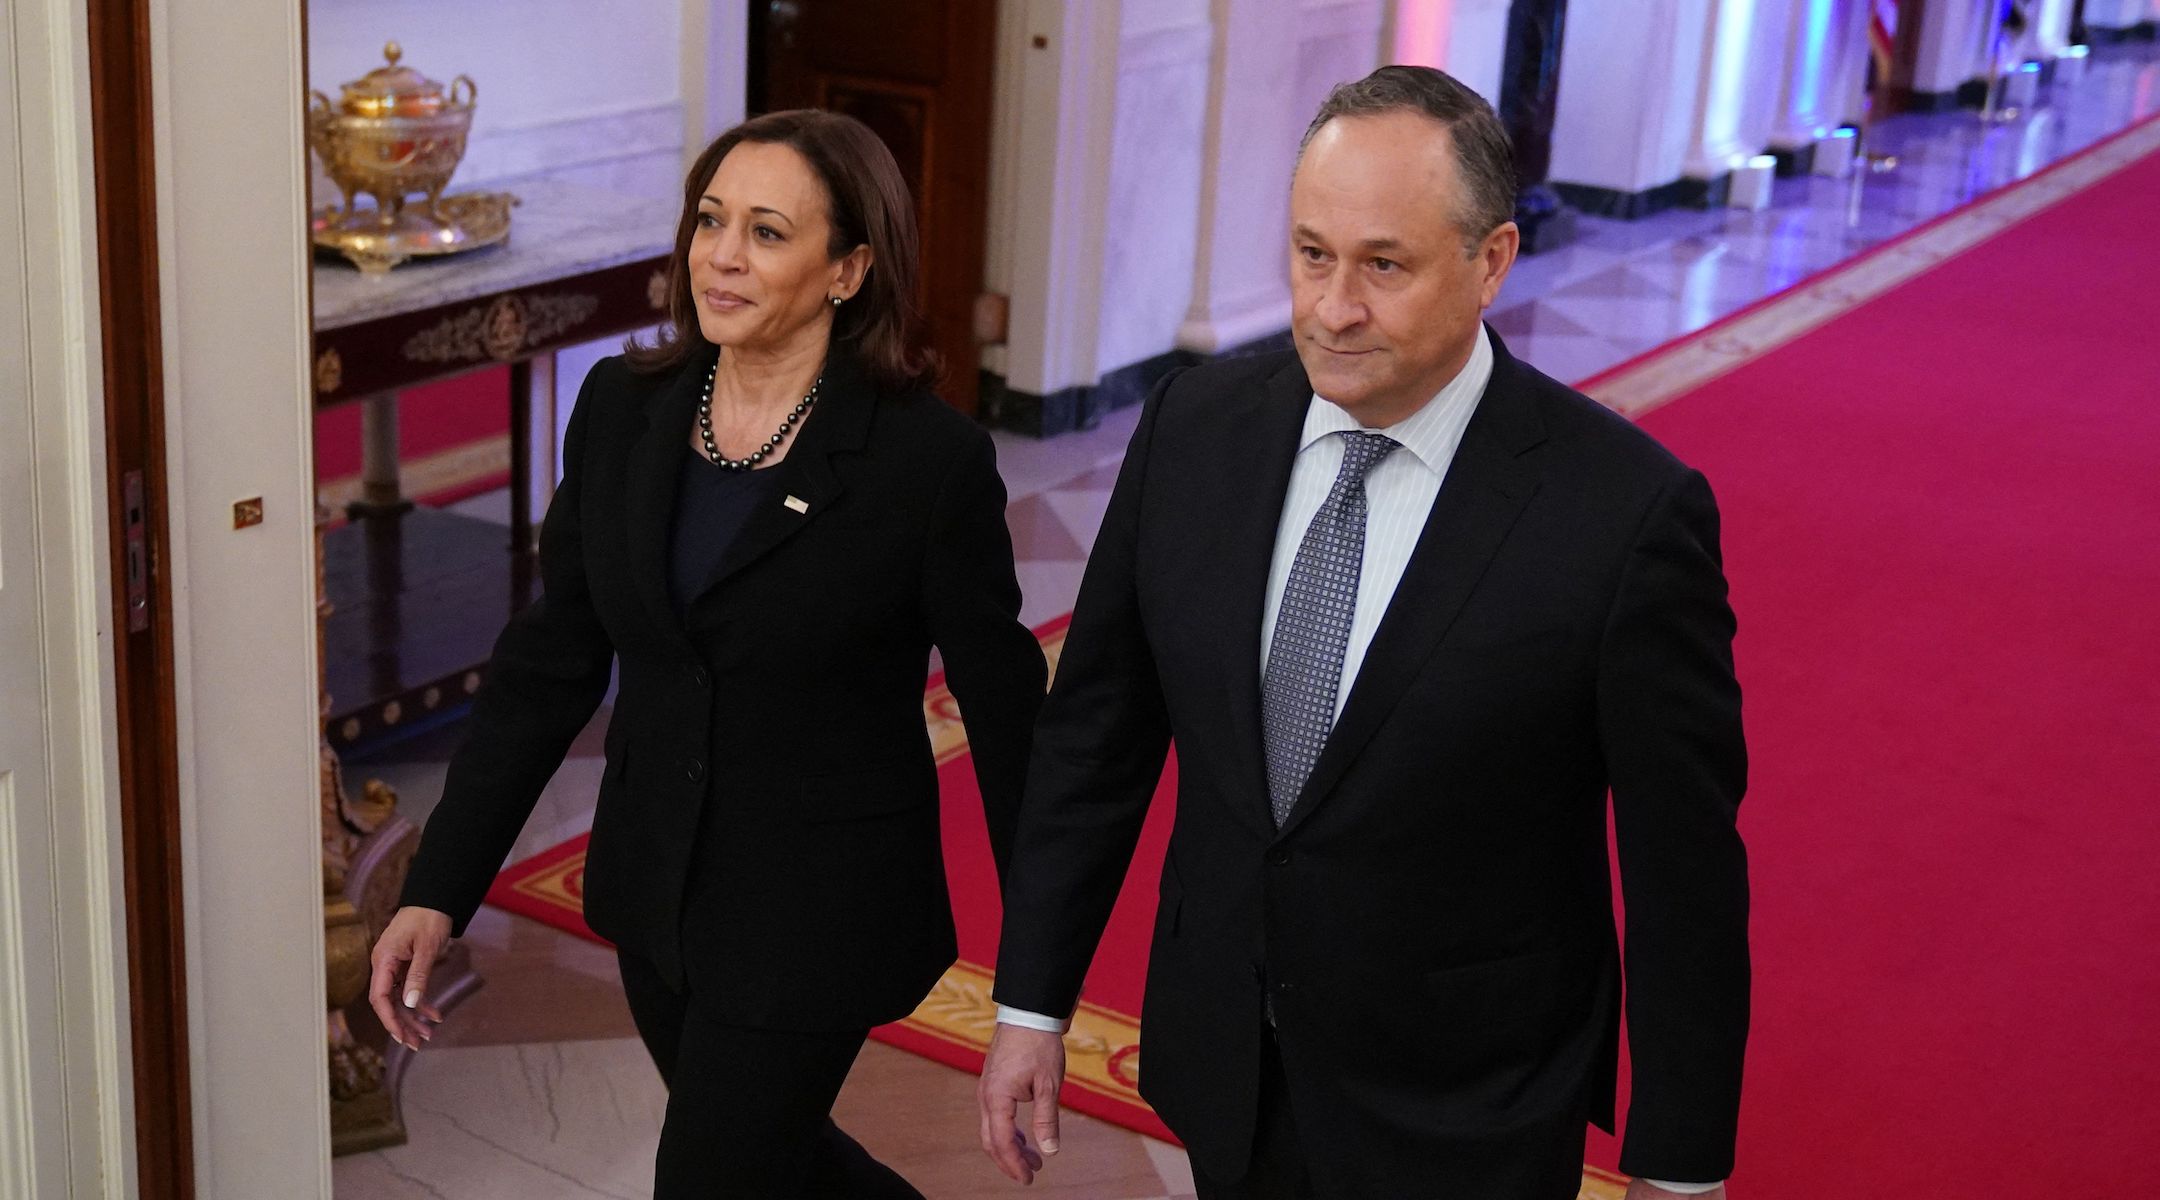 Vice President Kamala Harris and second gentleman Doug Emhoff arrive in the East Room of the White House, Jan. 6, 2023. (Mandel Ngan/AFP via Getty Images)